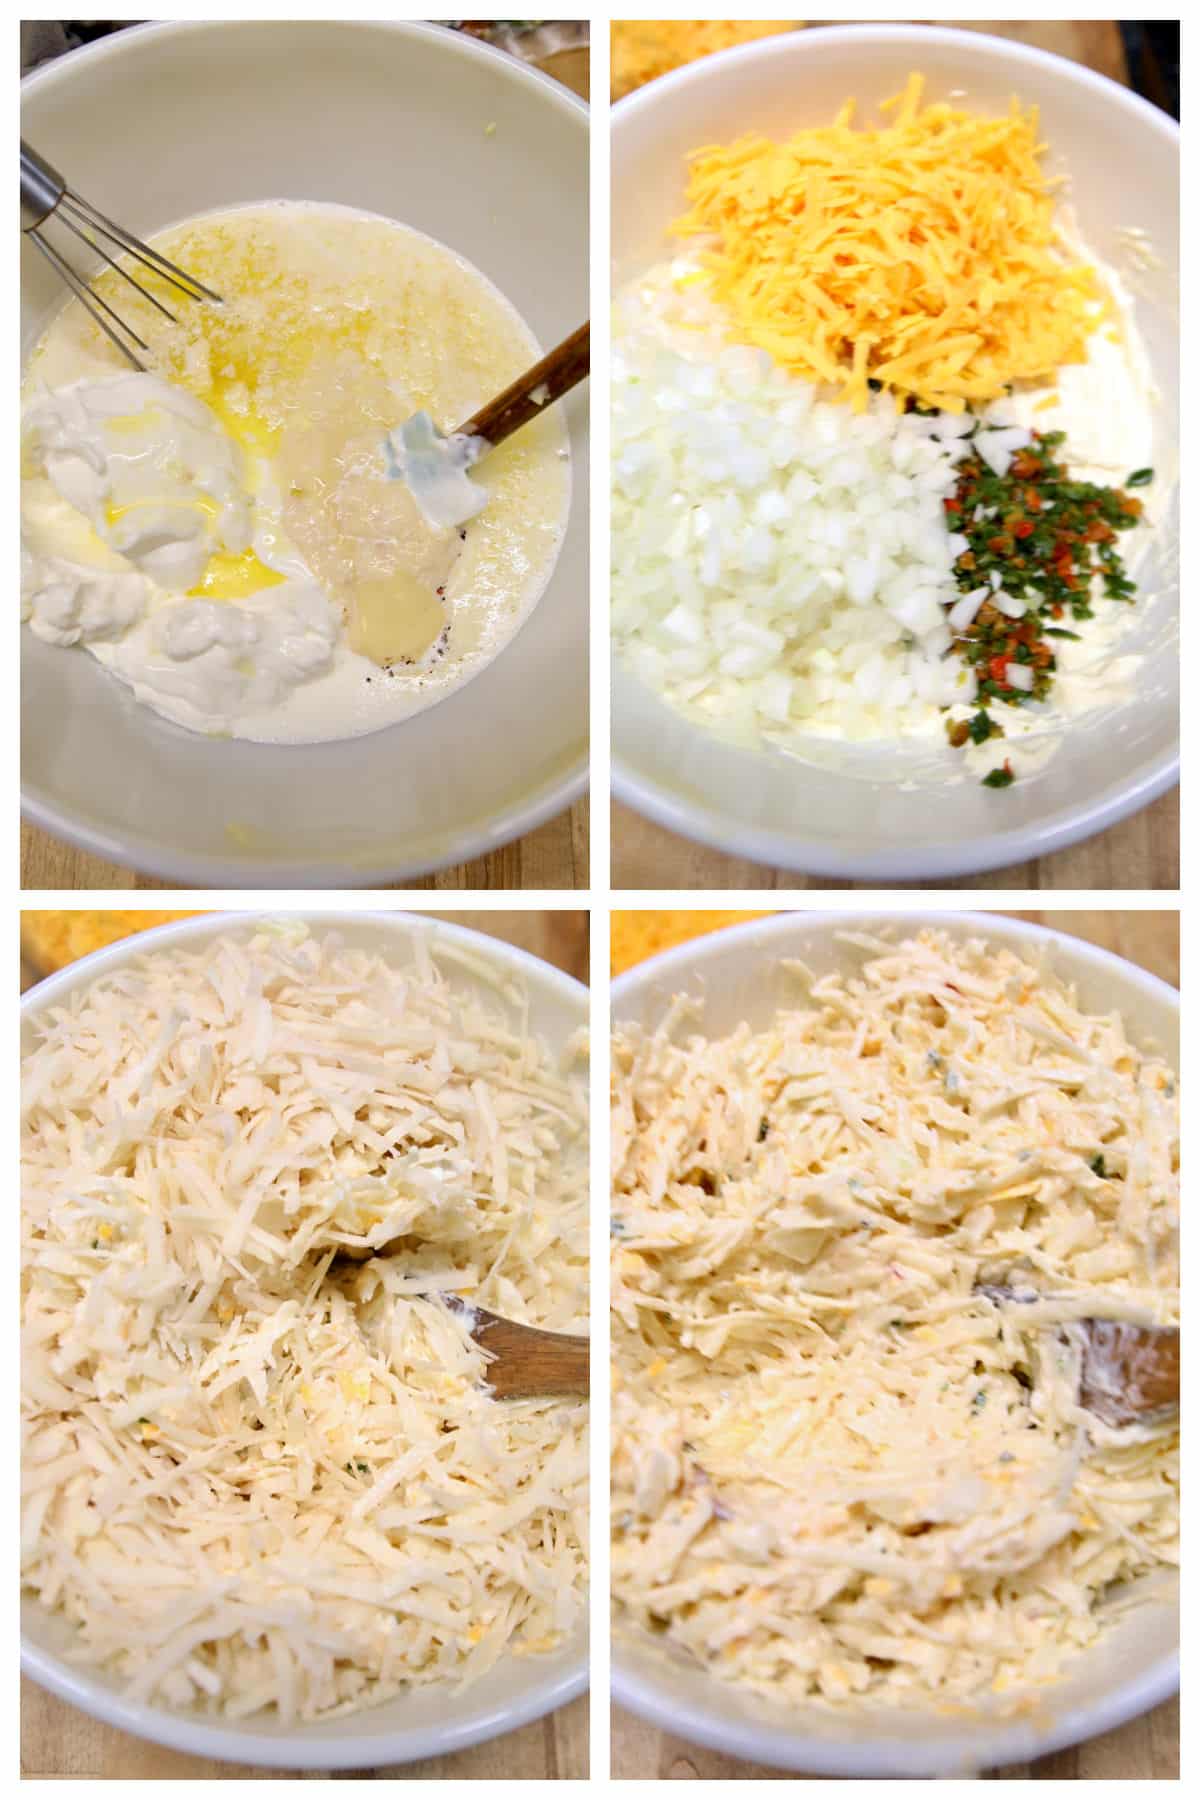 Making hashbrown casserole with cheesy sauce - collage.